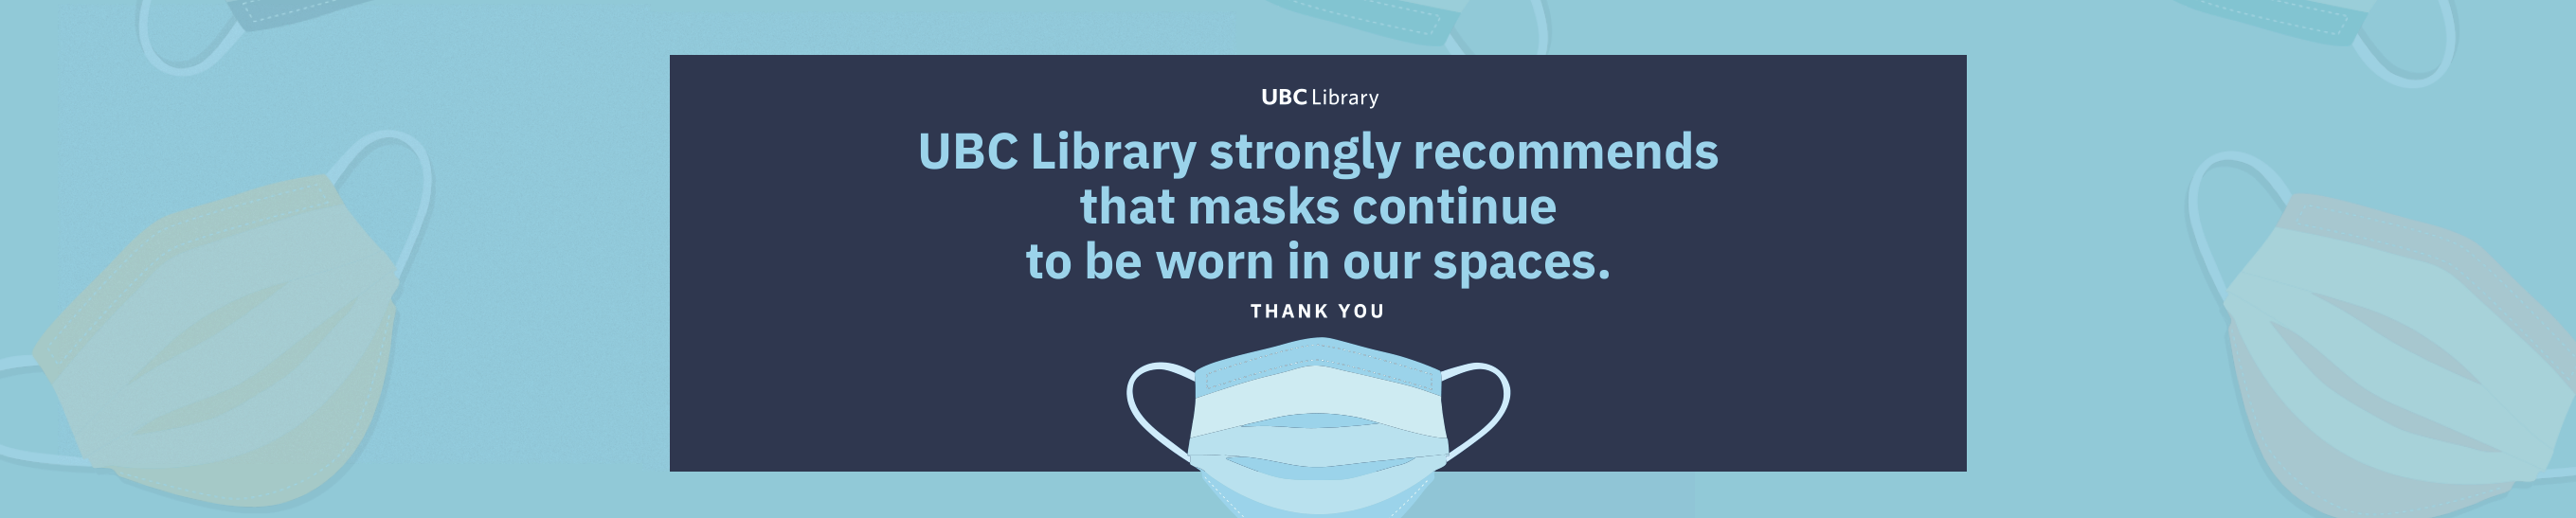 Masking Recommended in UBC Library